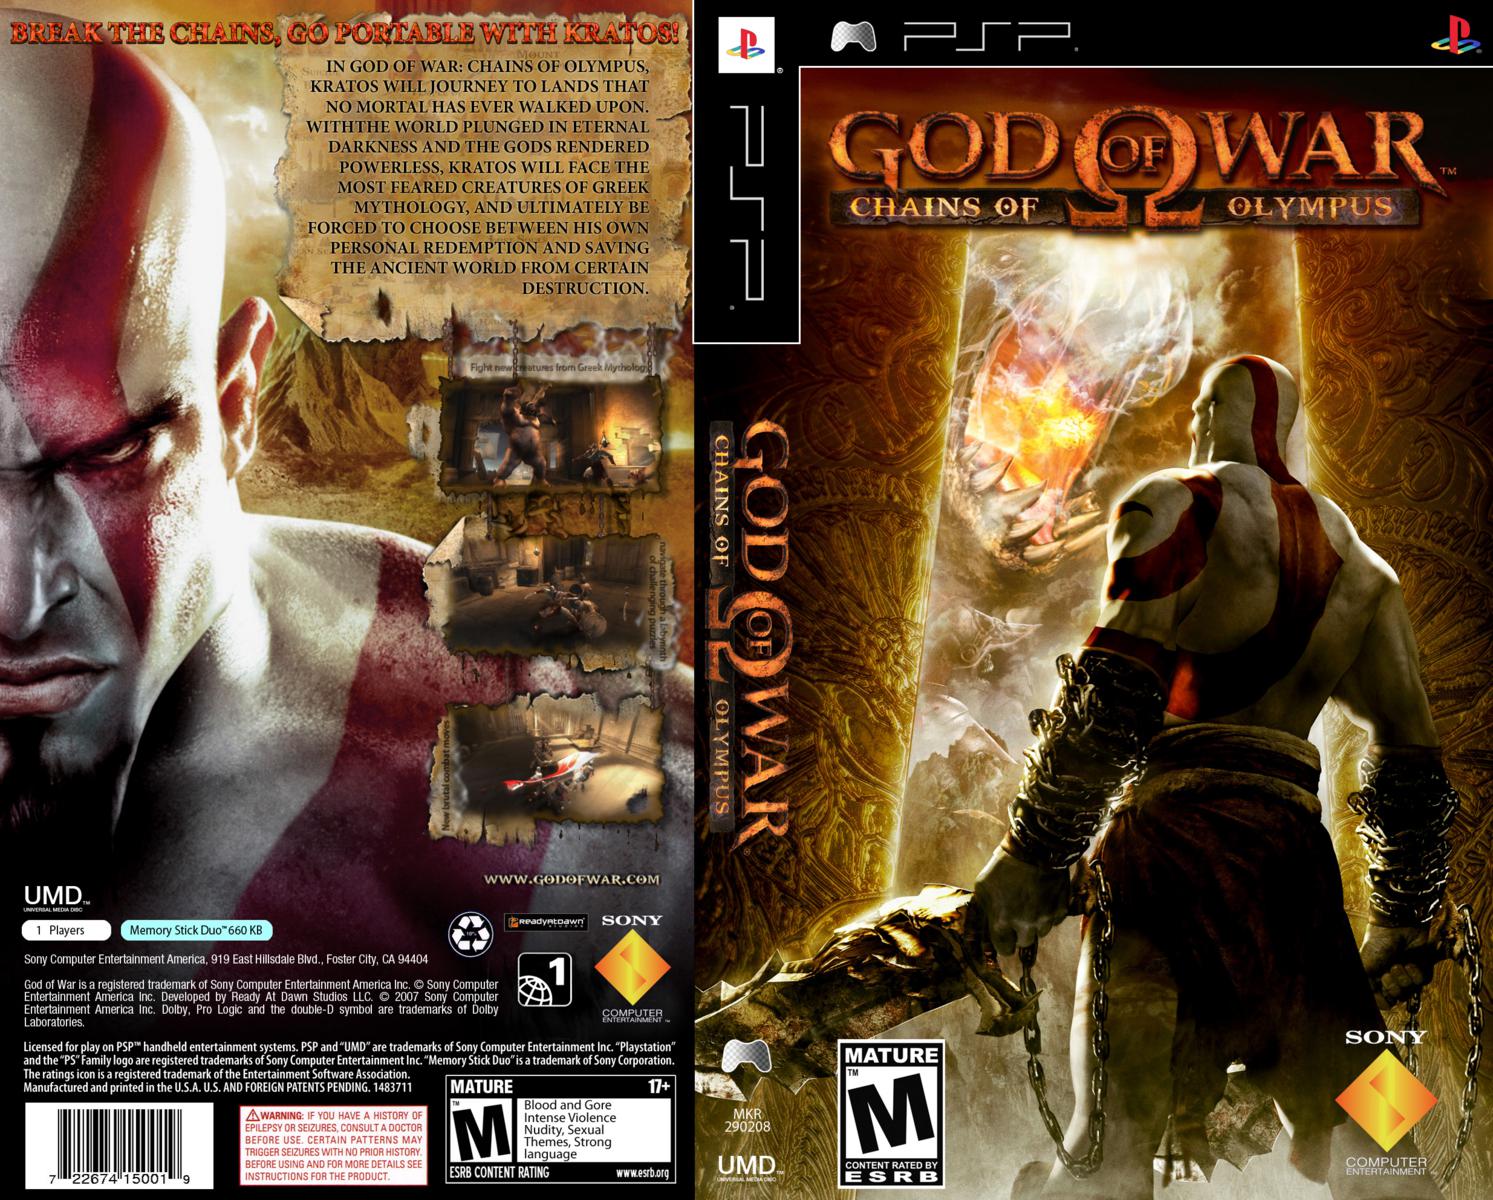 GOD OF WAR CHAINS OF OLYMPUS (PT-BR) – IGAMES